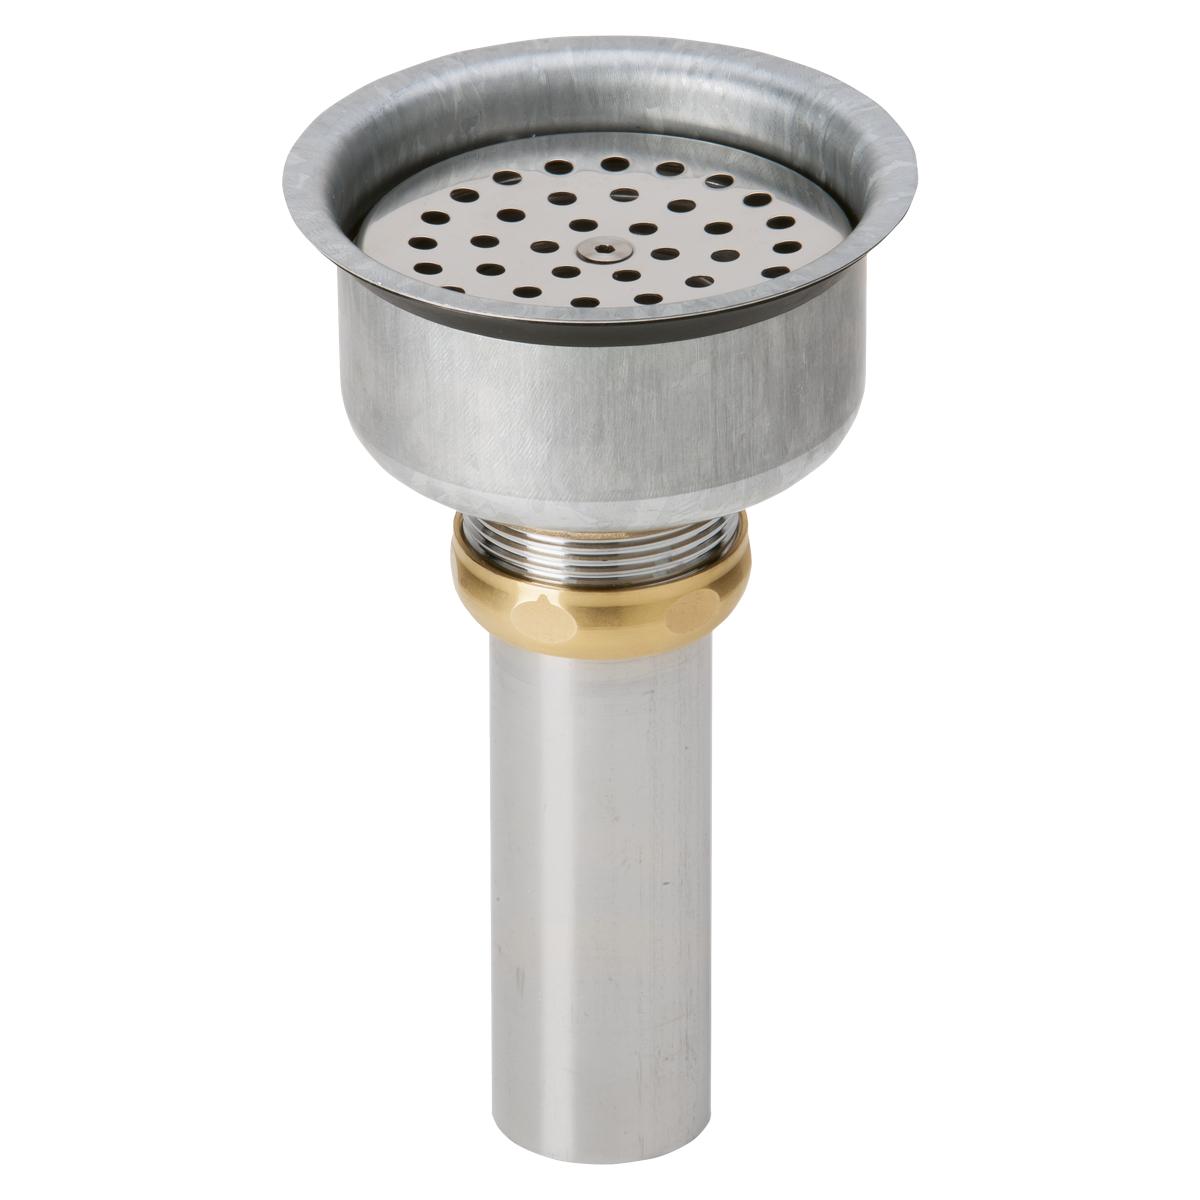 Elkay Vandal-resistant Strainer And Lkados Tailpiece Perfect Drain Chrome Plated Brass Body 1887284